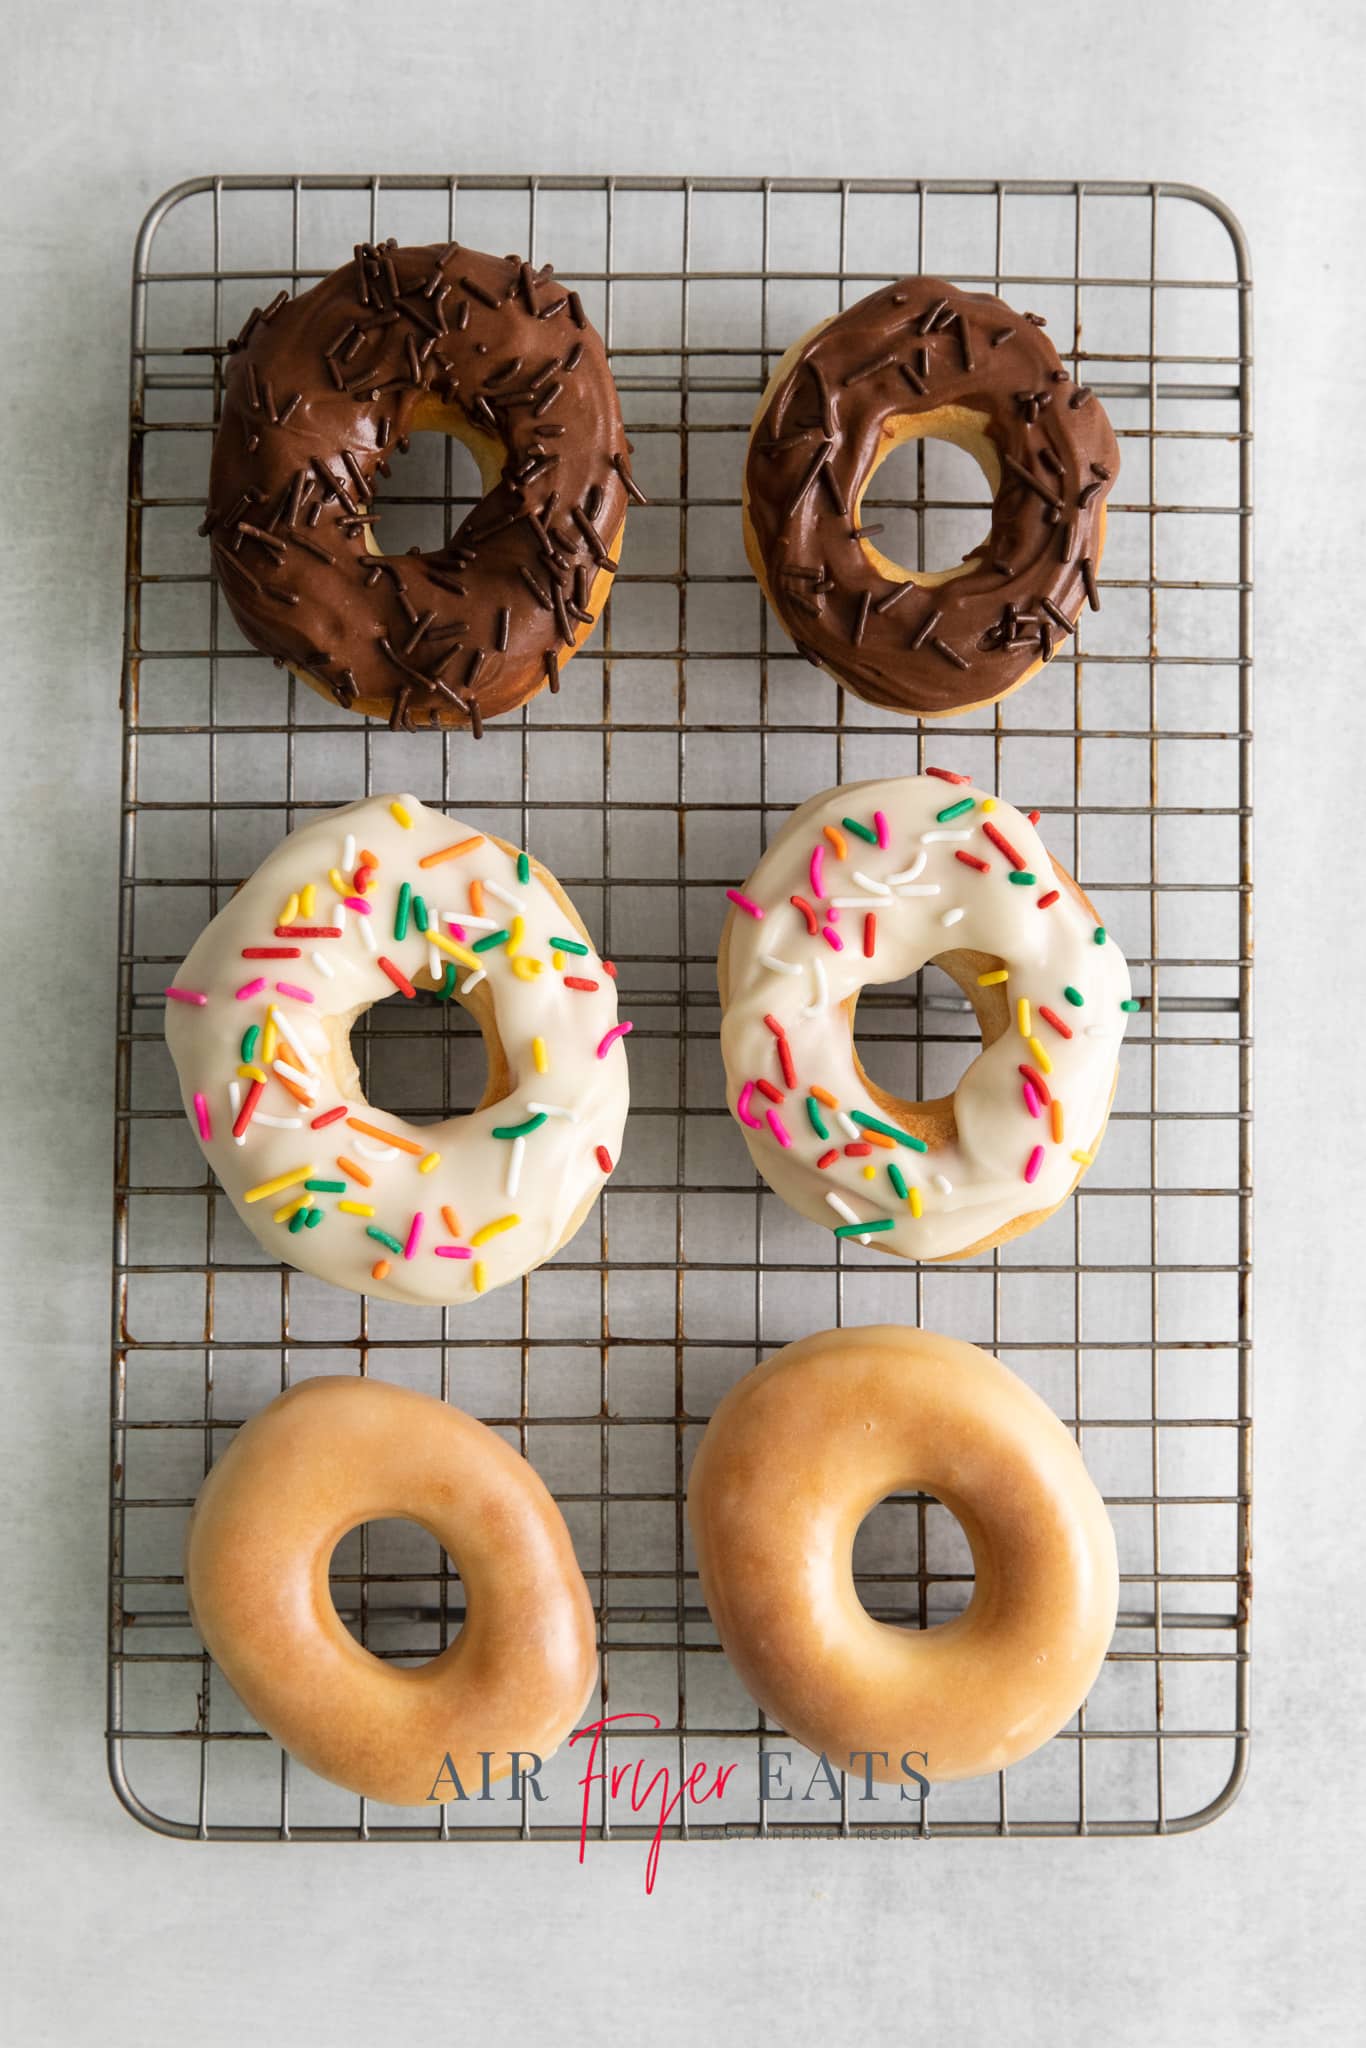 Top view photo of six air fryer doughnuts on a cooling rack. Two are glazed, two have vanilla frosting with colorful sprinkles, and two have chocolate frosting with chocolate sprinkles.